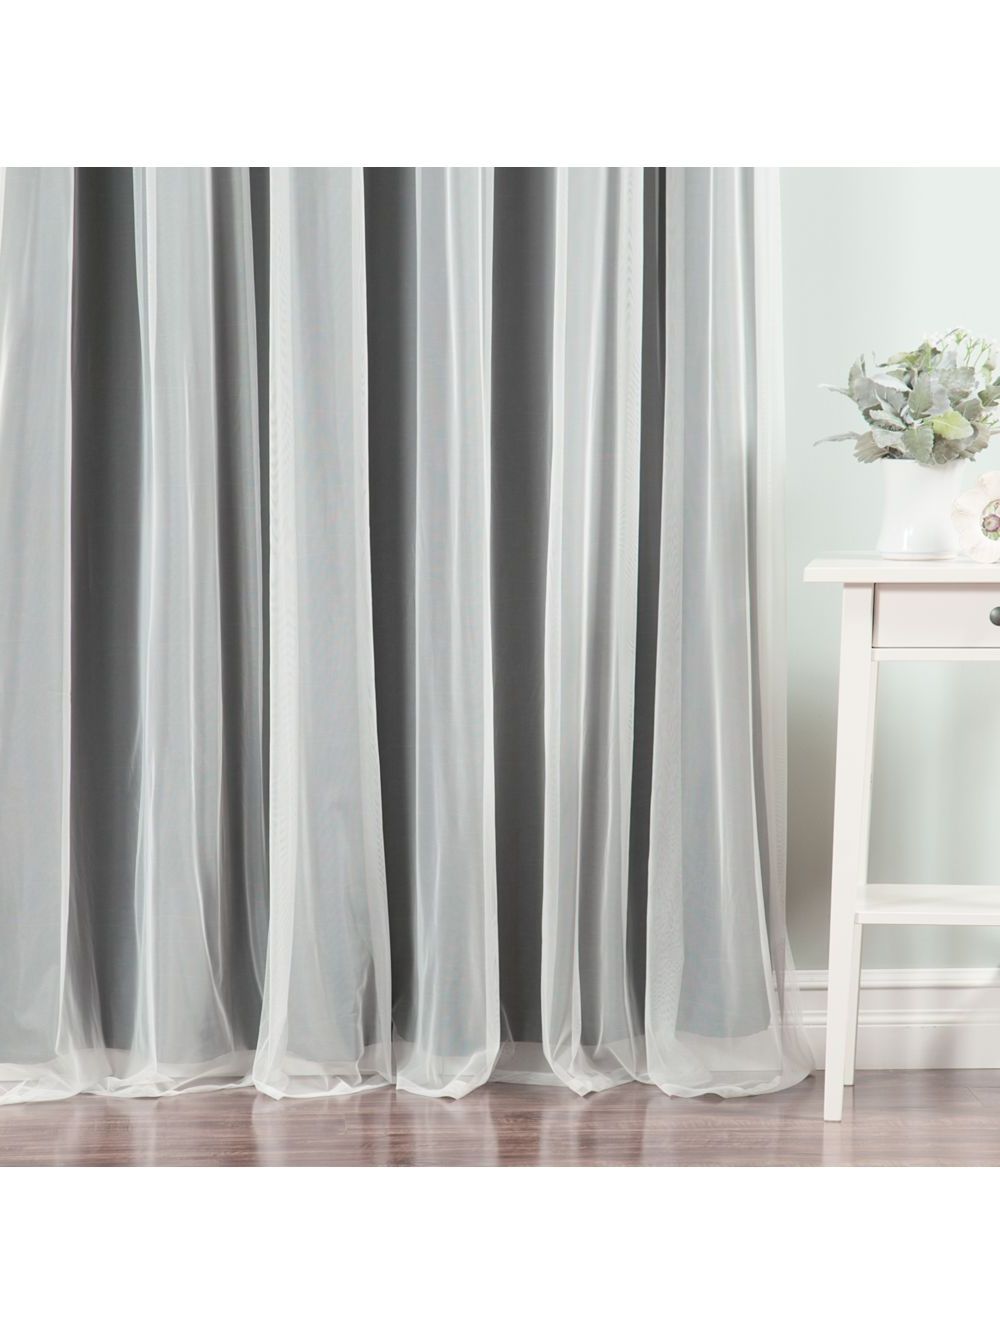 Mix & Match Blackout Tulle Lace Bronze Grommet Curtain Panel Sets For Most Recent Umixm Wide Tulle & Blackout Curtains – Navy (View 20 of 20)